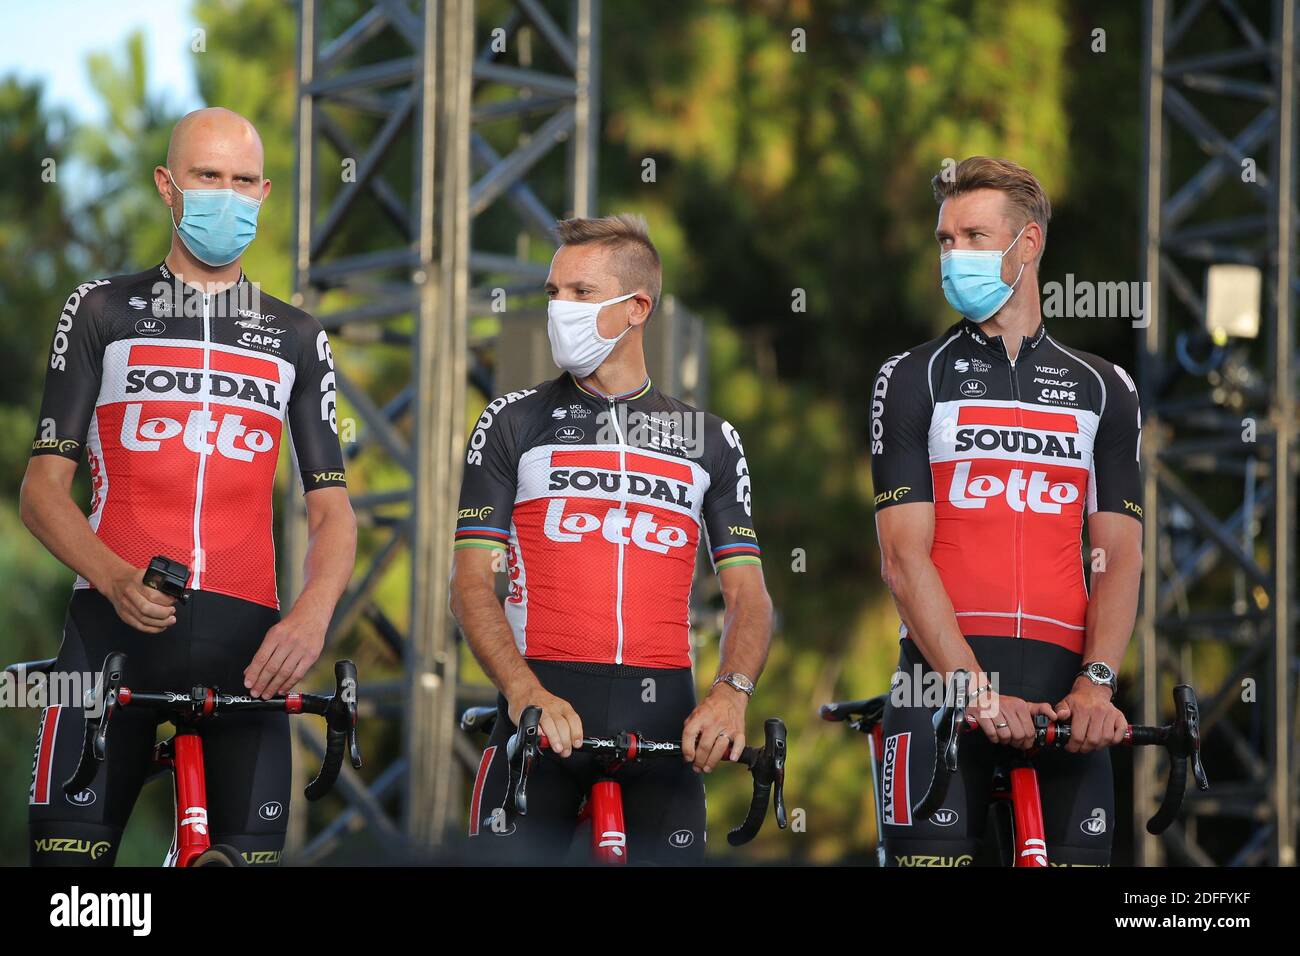 Handout photo. Lotto - Soudal team members during the presentation of the  official teams taking part in the Tour de France 2020 in Nice, South of  France on August 27, 2020. Photo